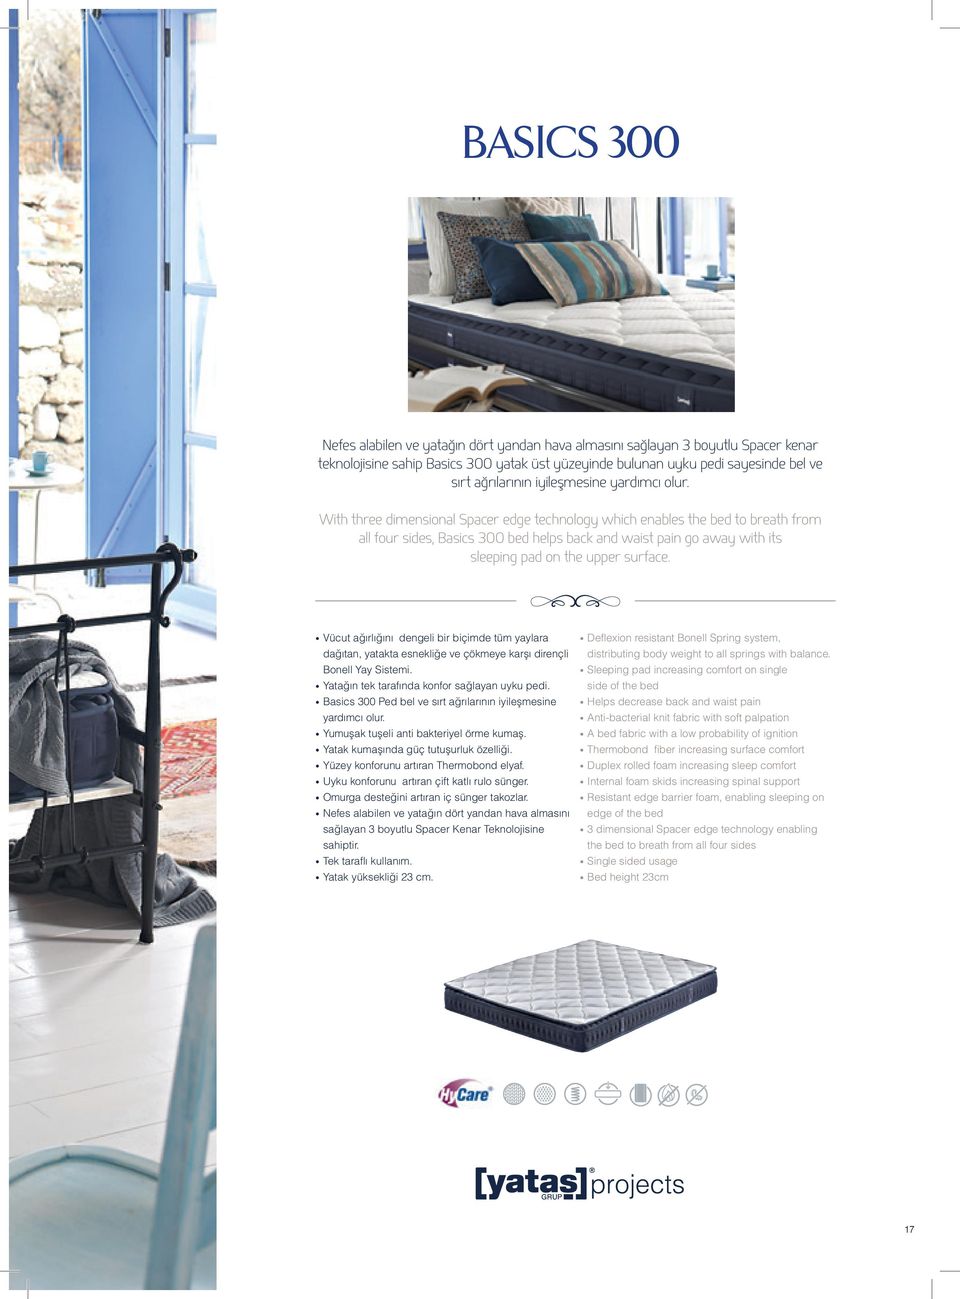 With three dimensional Spacer edge technology which enables the bed to breath from all four sides, Basics 300 bed helps back and waist pain go away with its sleeping pad on the upper surface.